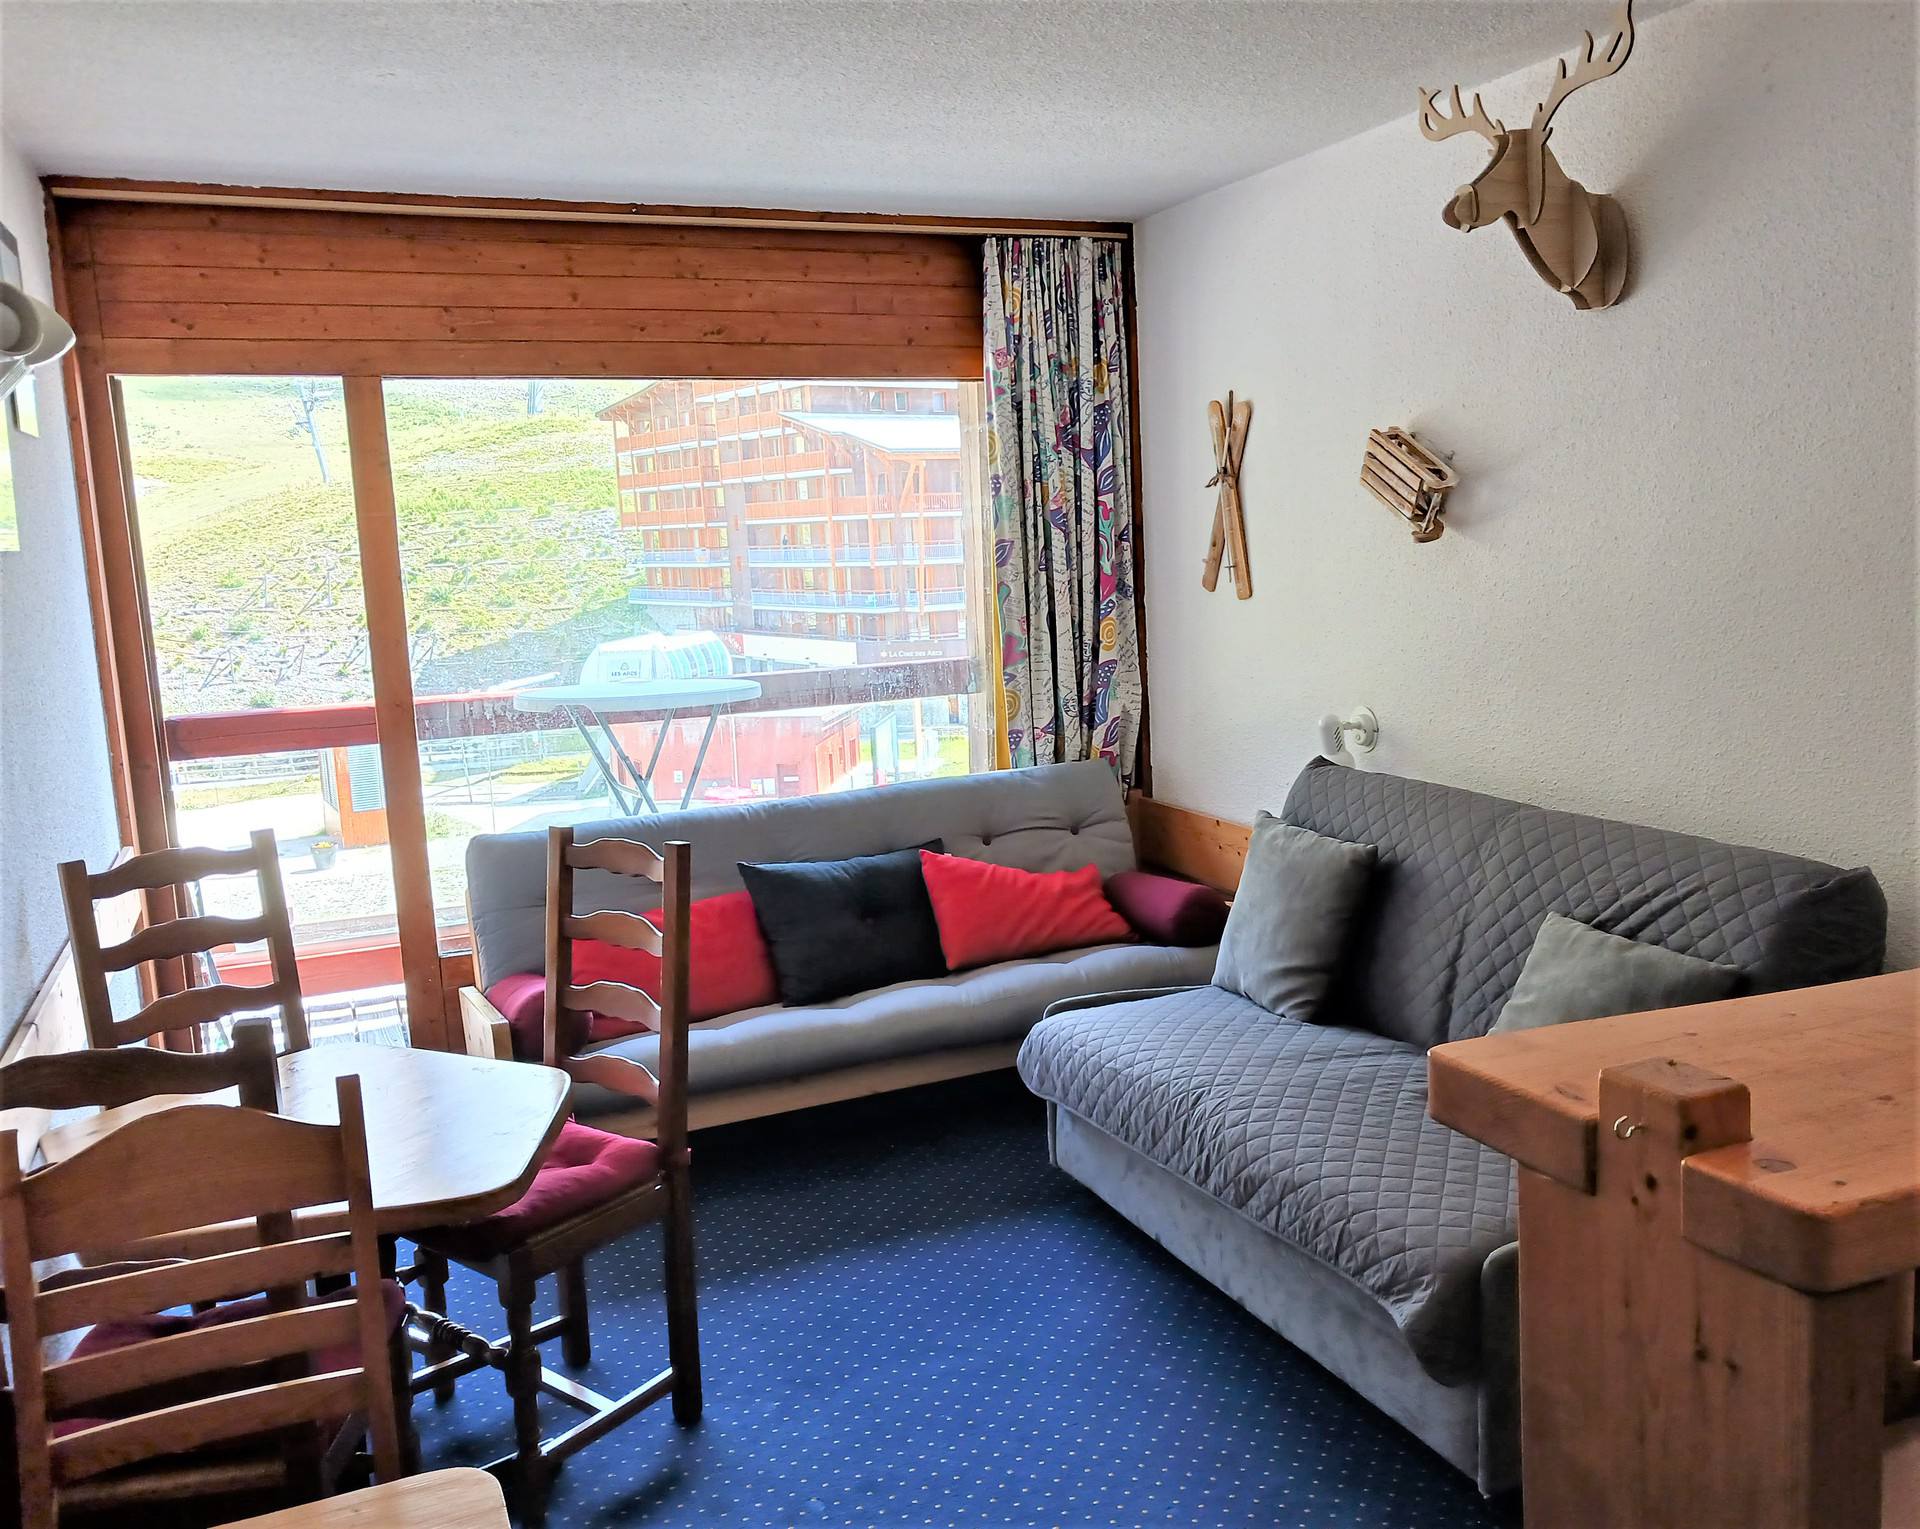 Studio 4 people - RESIDENCE HOTEL AIGUILLE ROUGE - Les Arcs 2000